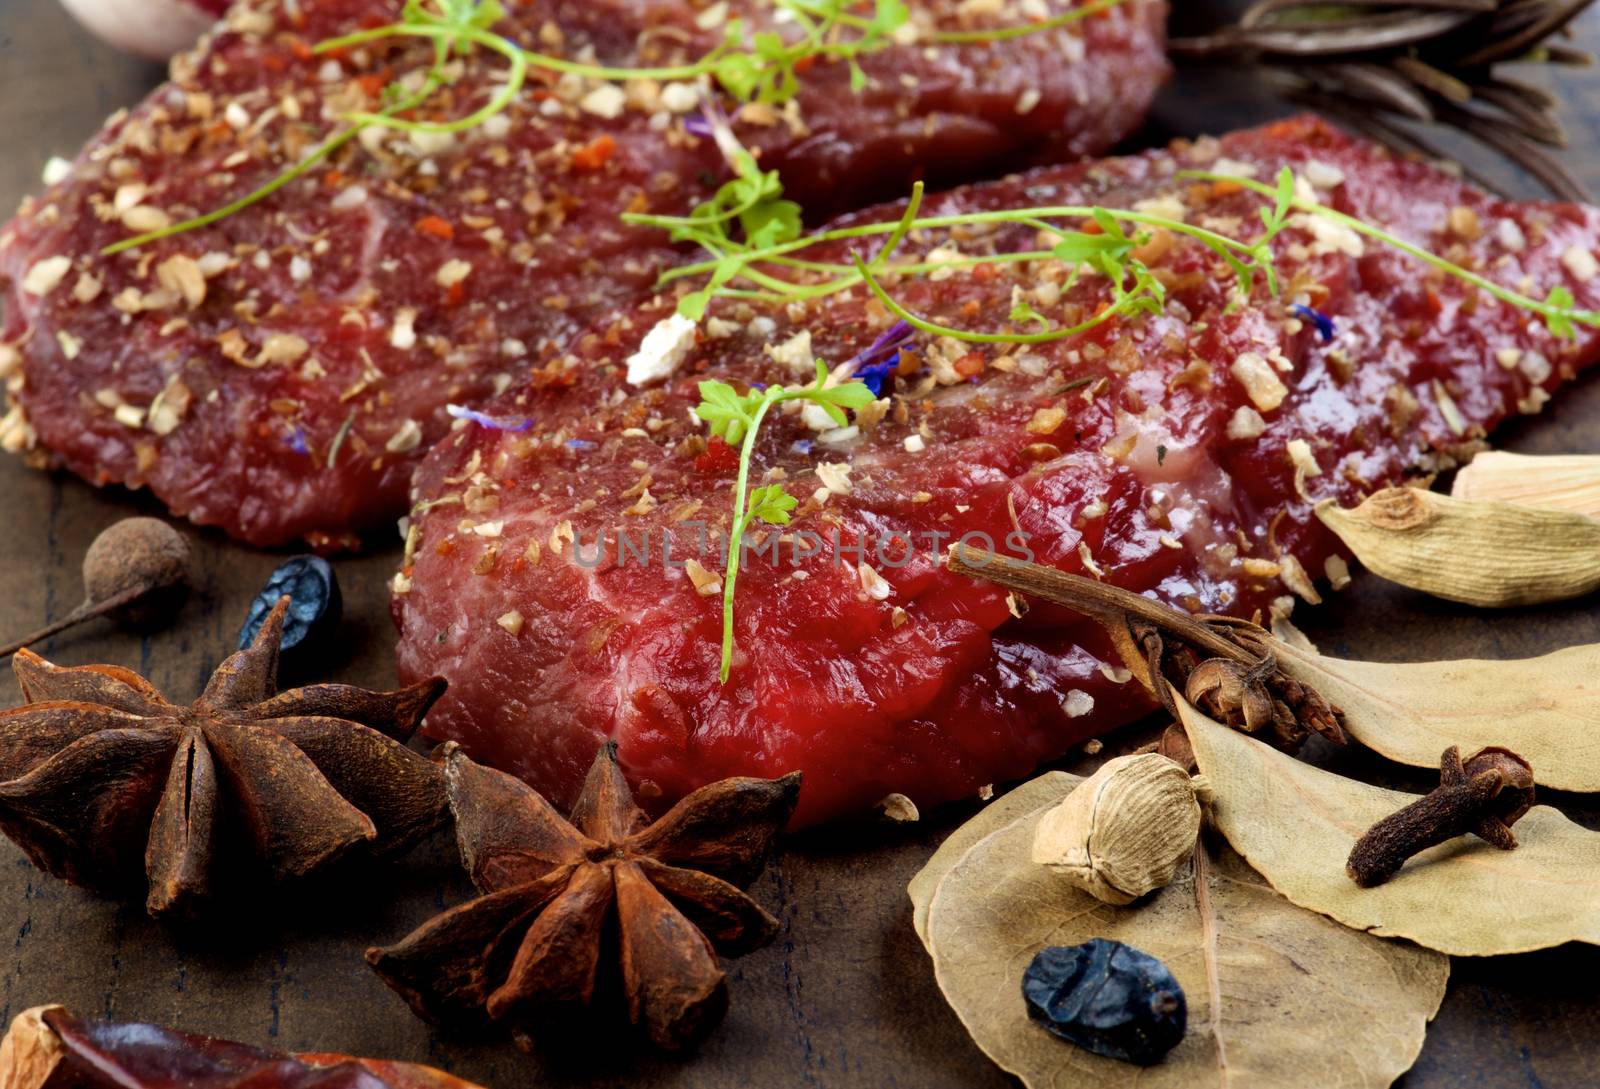 Two Marinated Raw Boneless Beef Steaks with Herbs and Spices, Garlic and Chili Pepper closeup on Wooden Cutting Board. Focus on Foreground